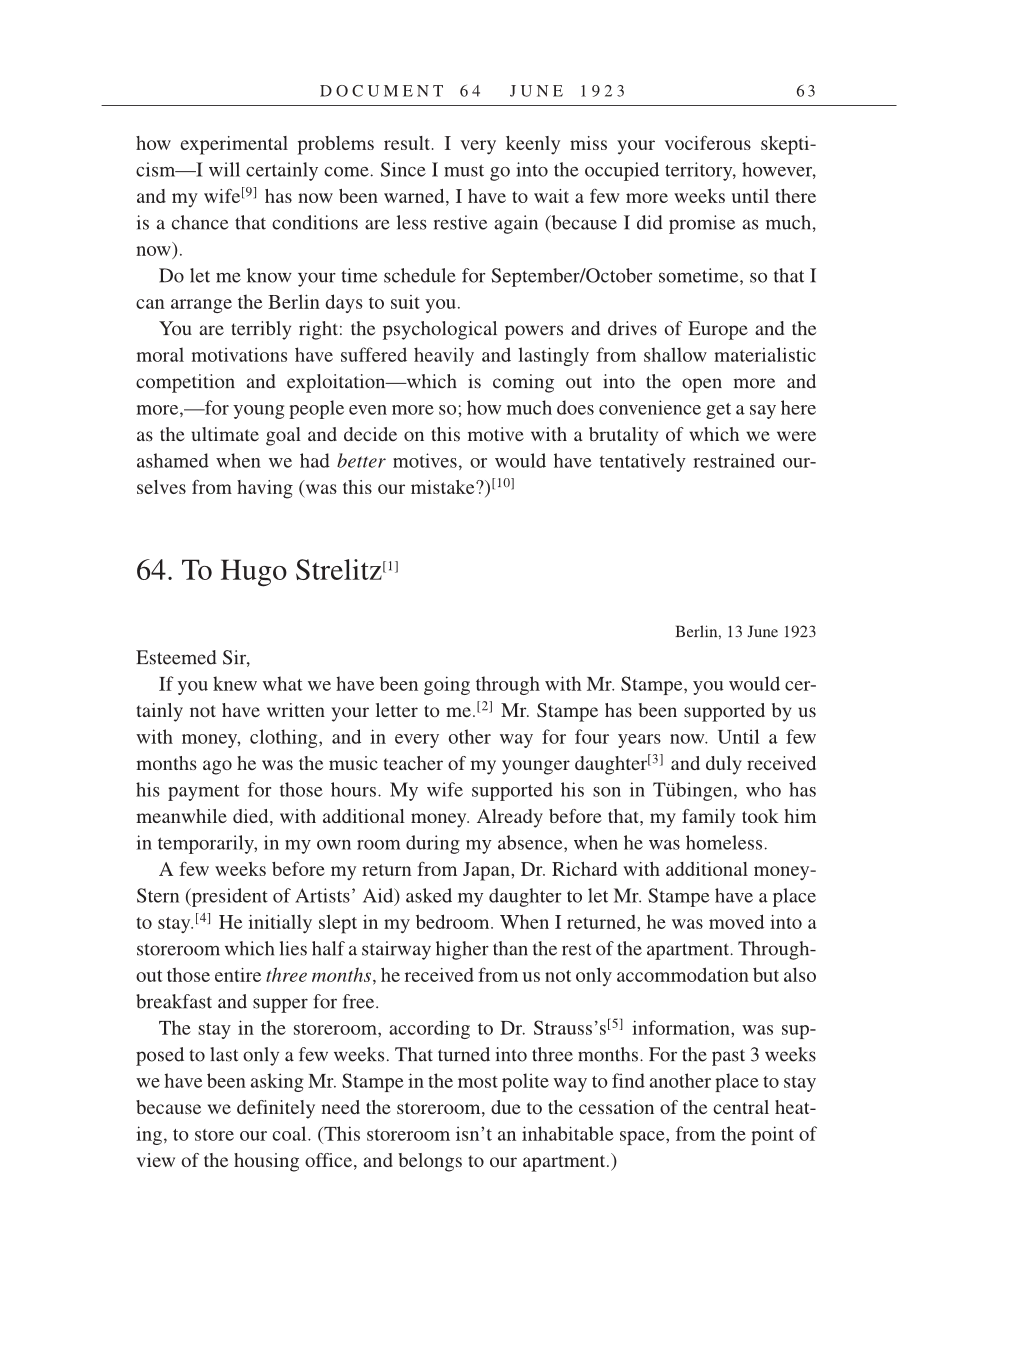 Volume 14: The Berlin Years: Writings & Correspondence, April 1923-May 1925 (English Translation Supplement) page 63